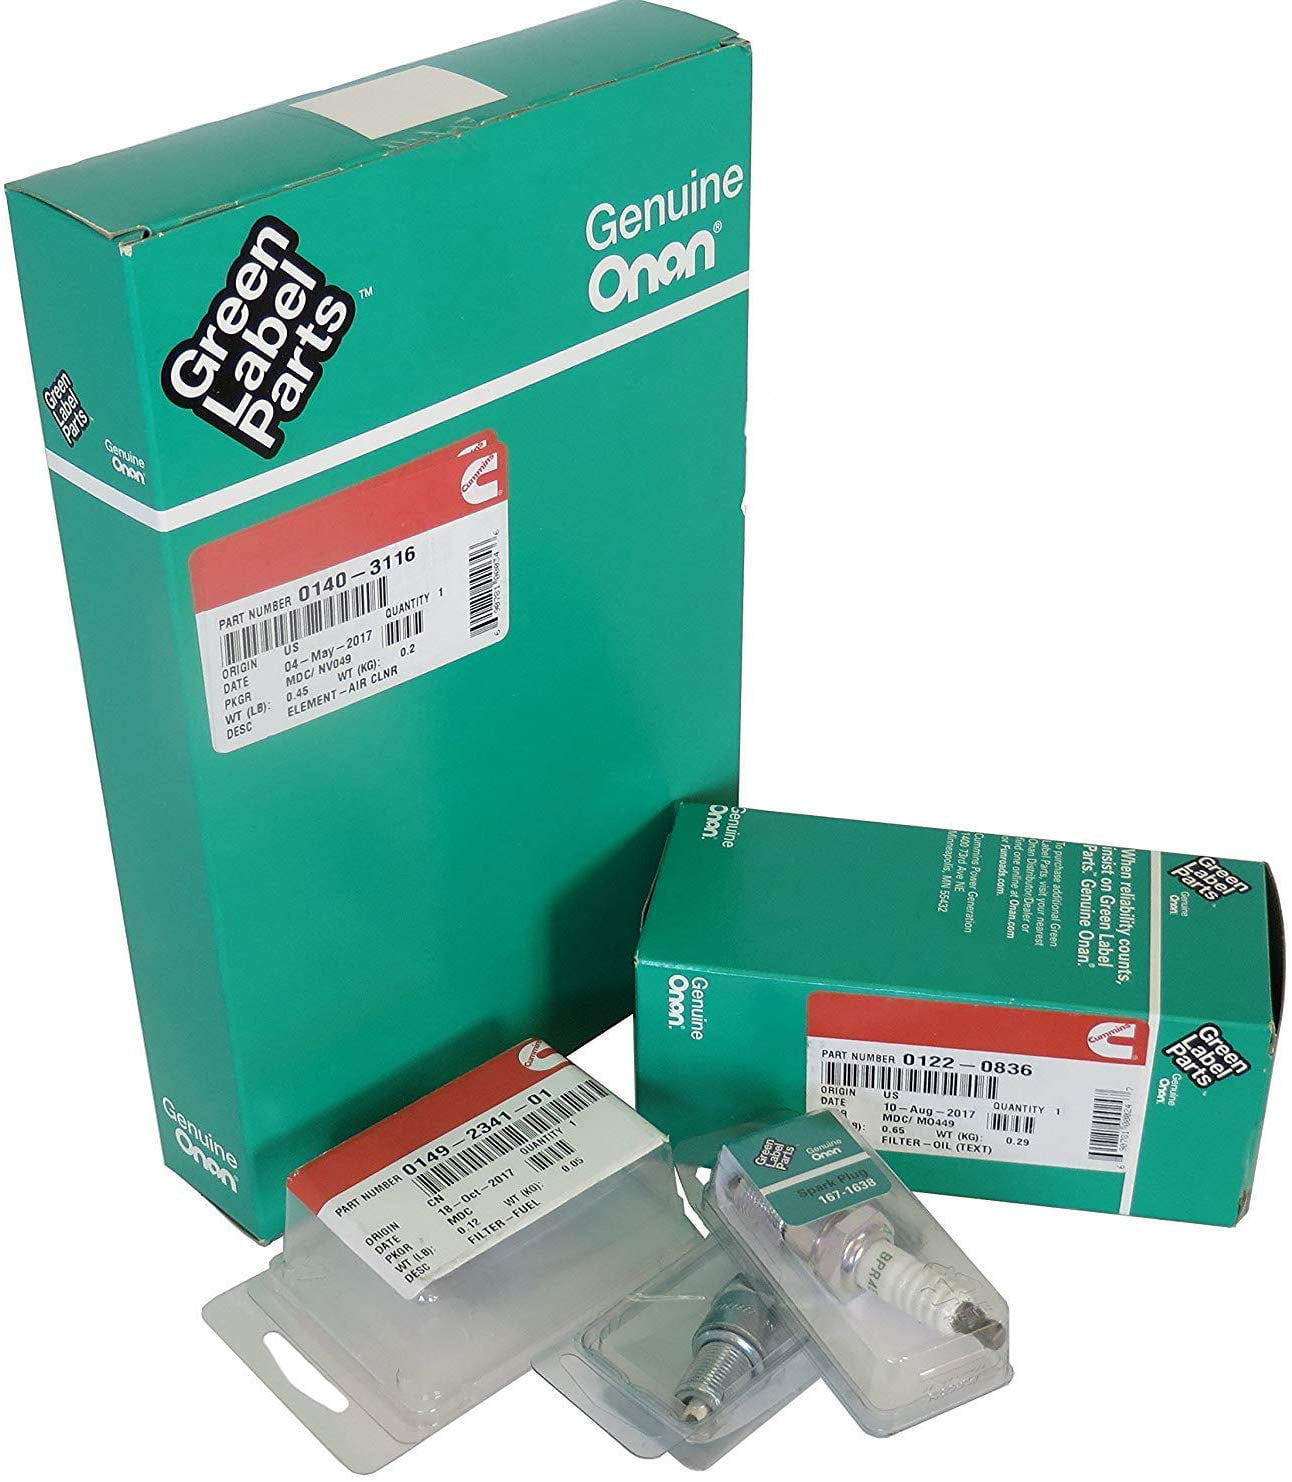 HGJAA Tune Up Kit for Onan RV Generators 5500 and 7000 HGJAB and HGJAC 